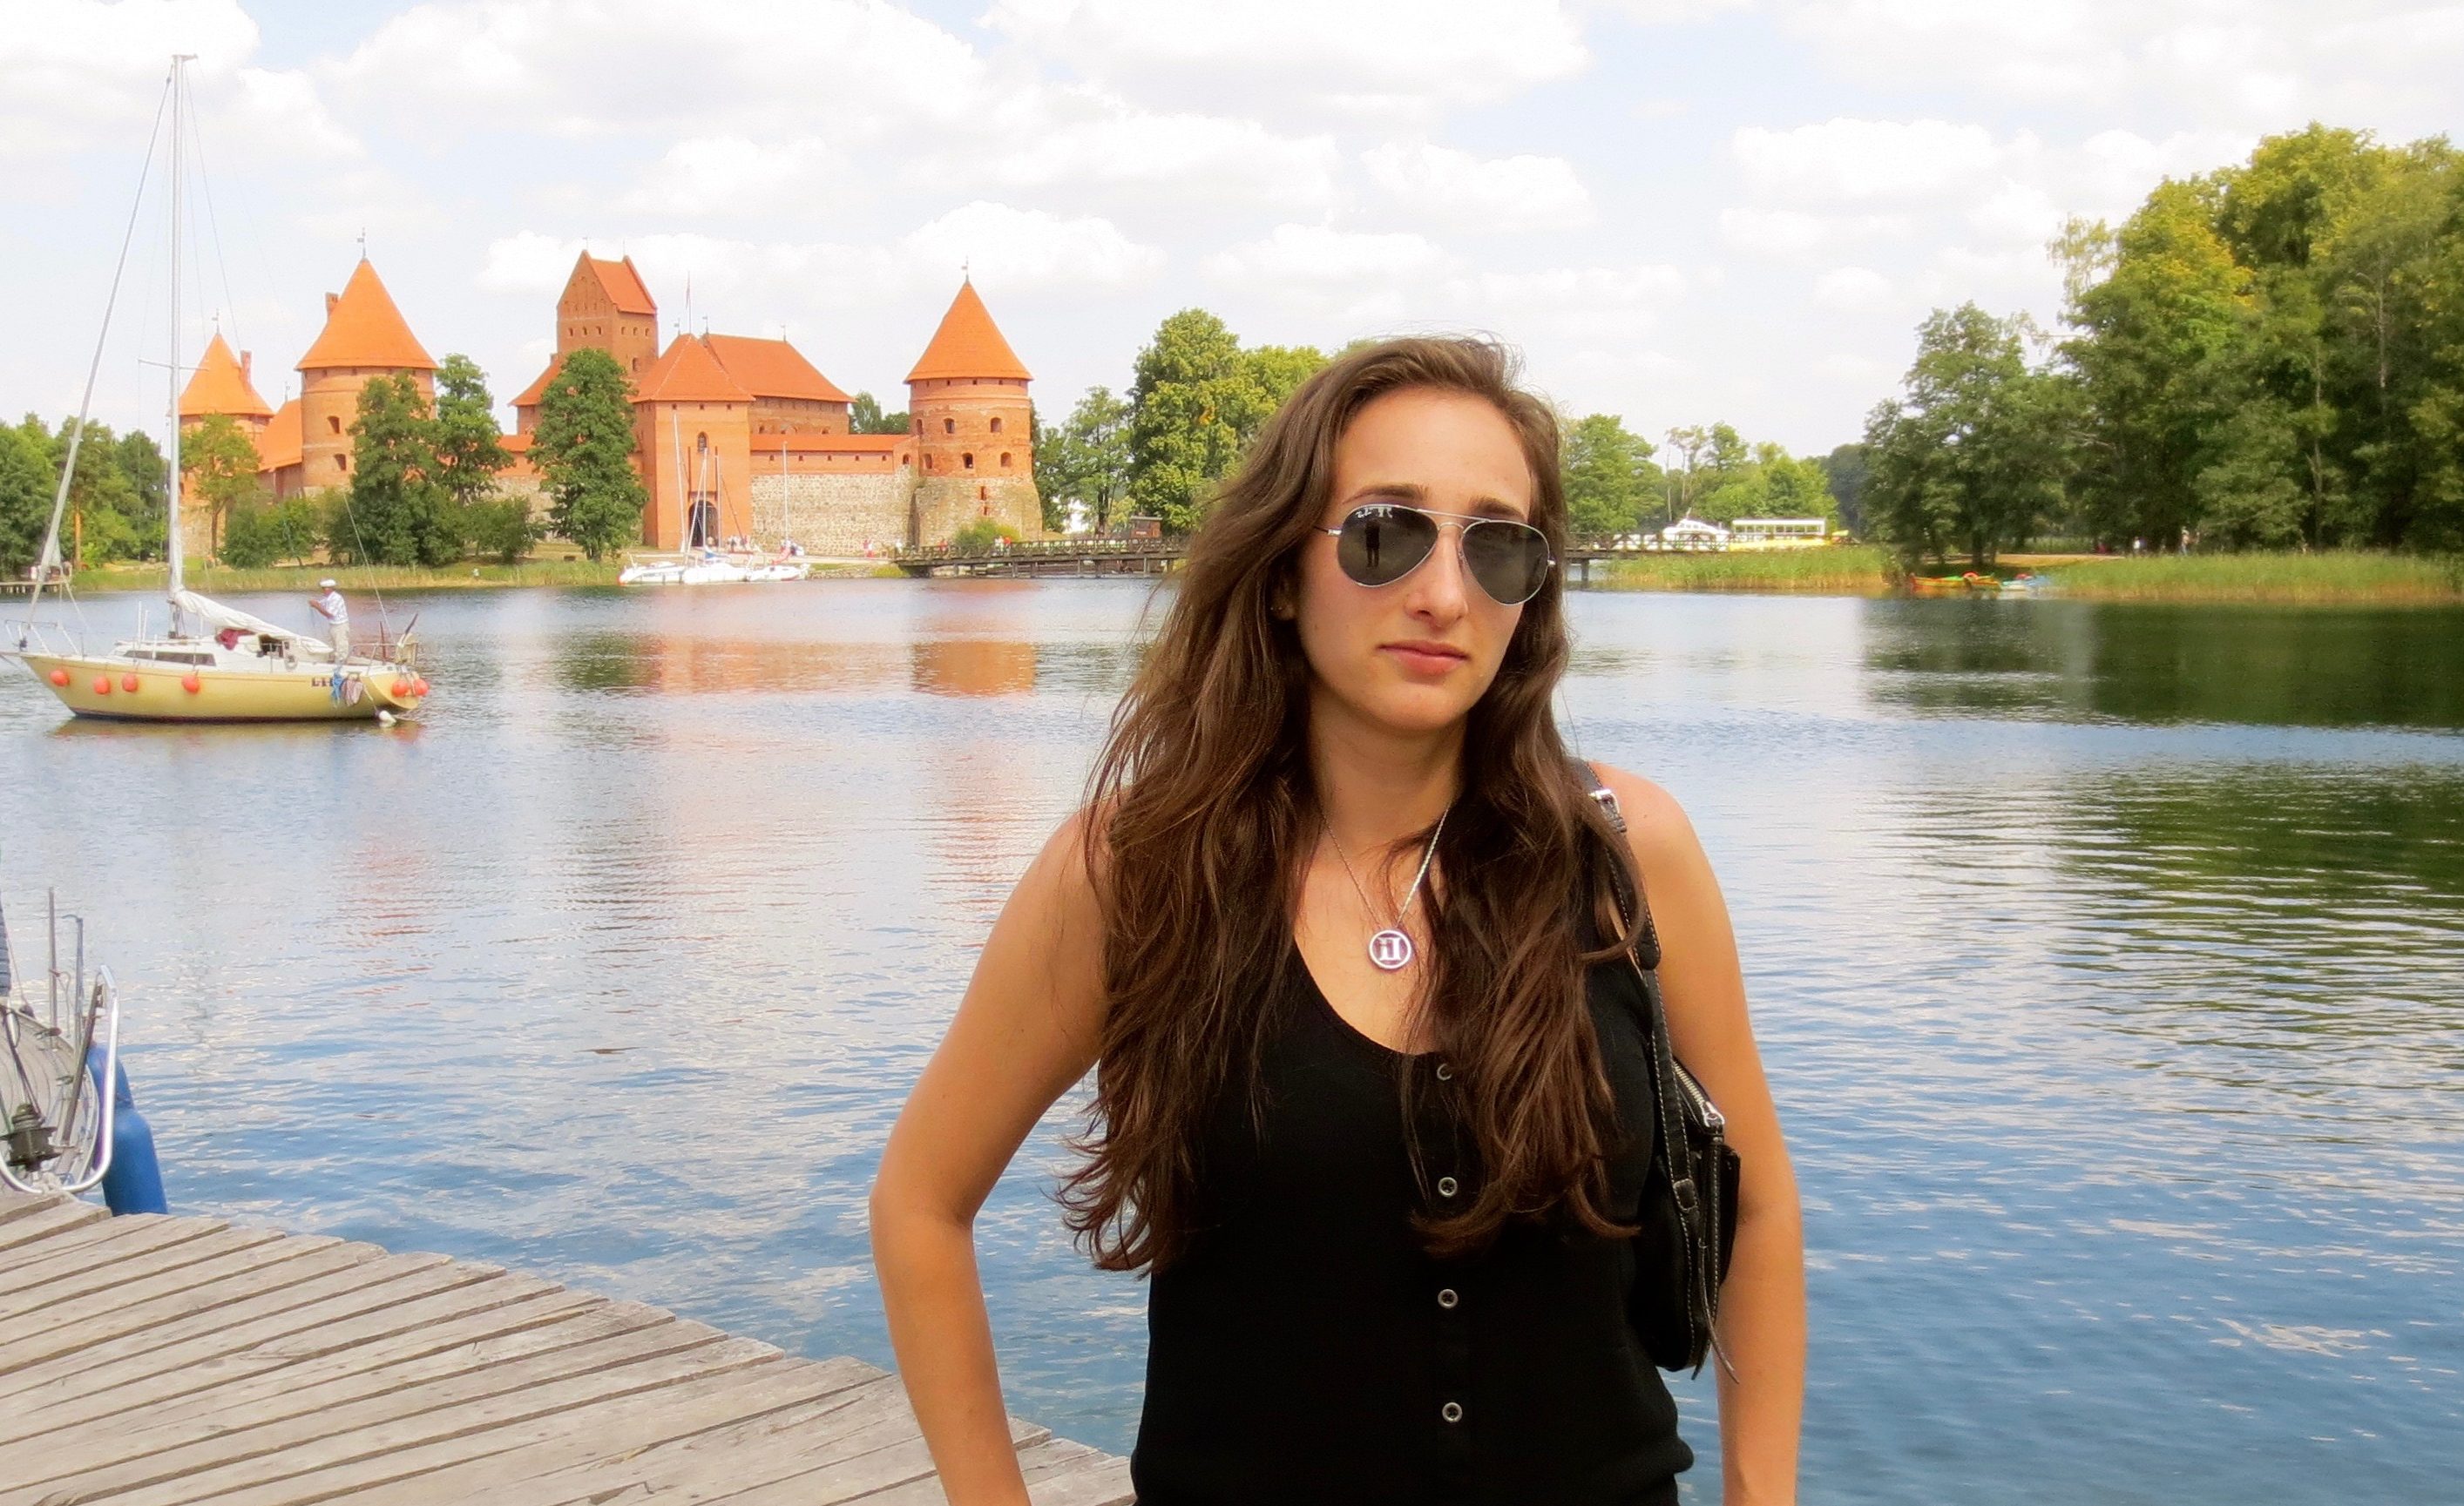 Exploring medieval castles in Lithuania.